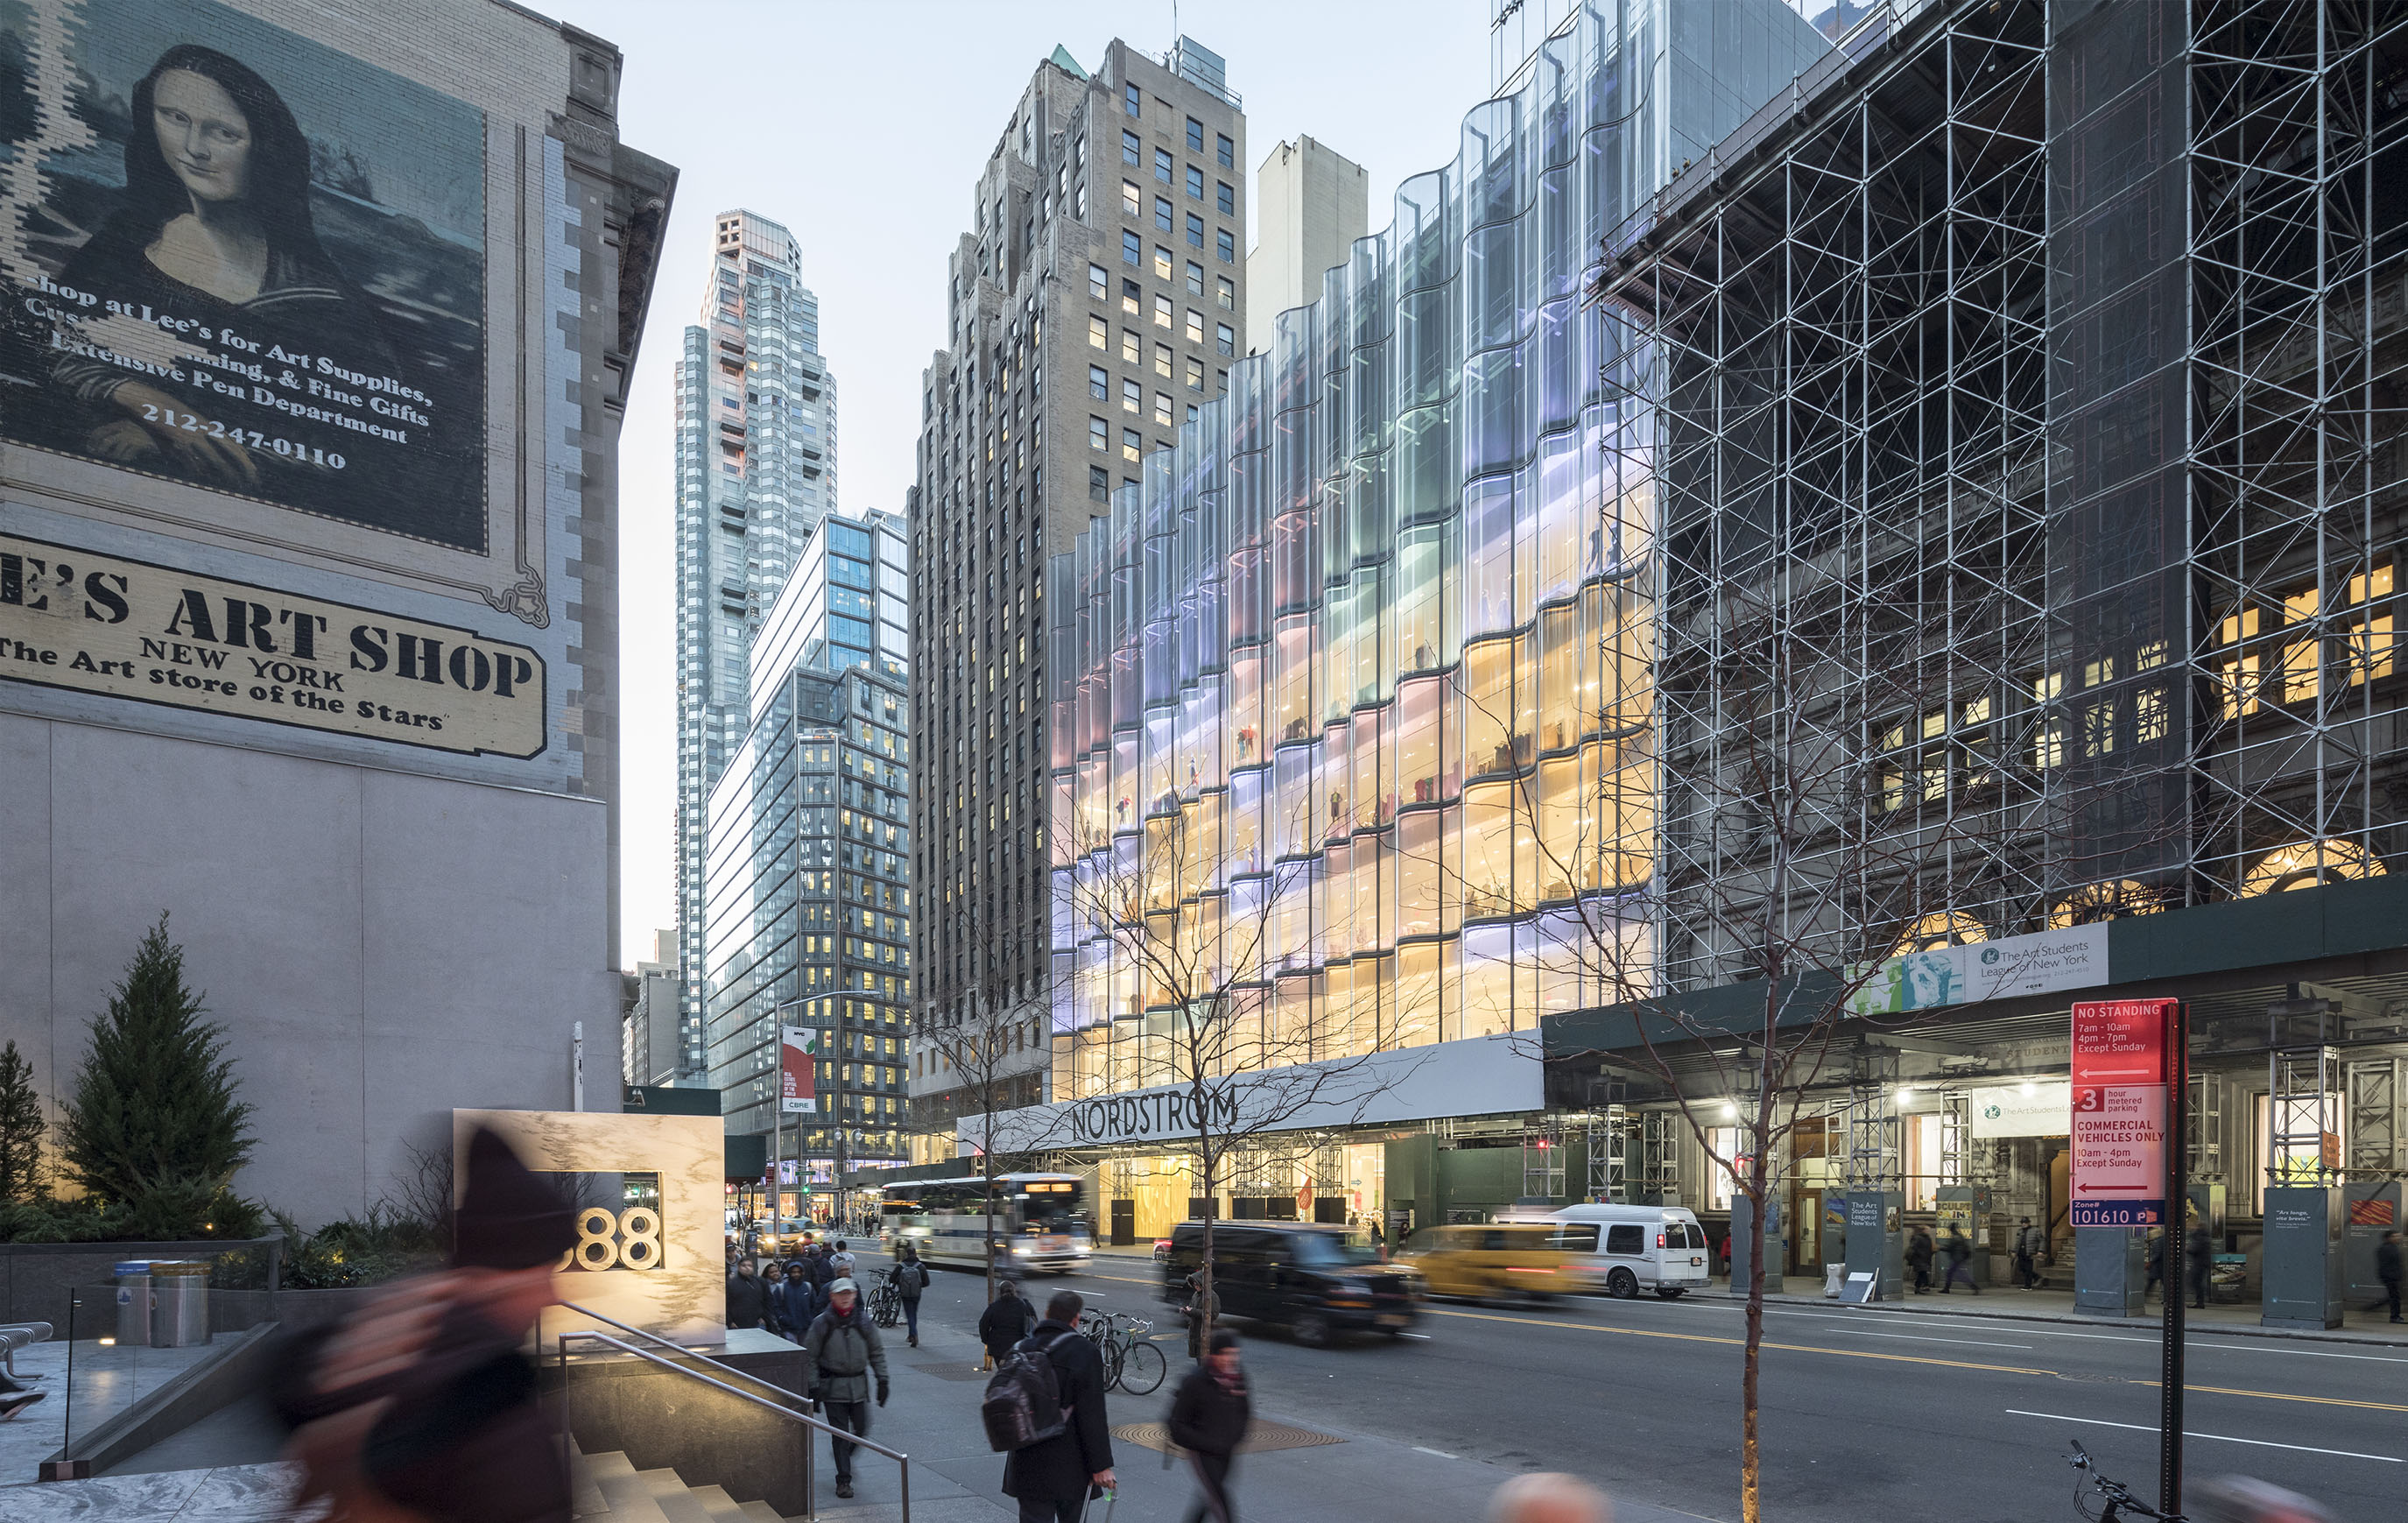 Nordstrom's new flagship store in New York